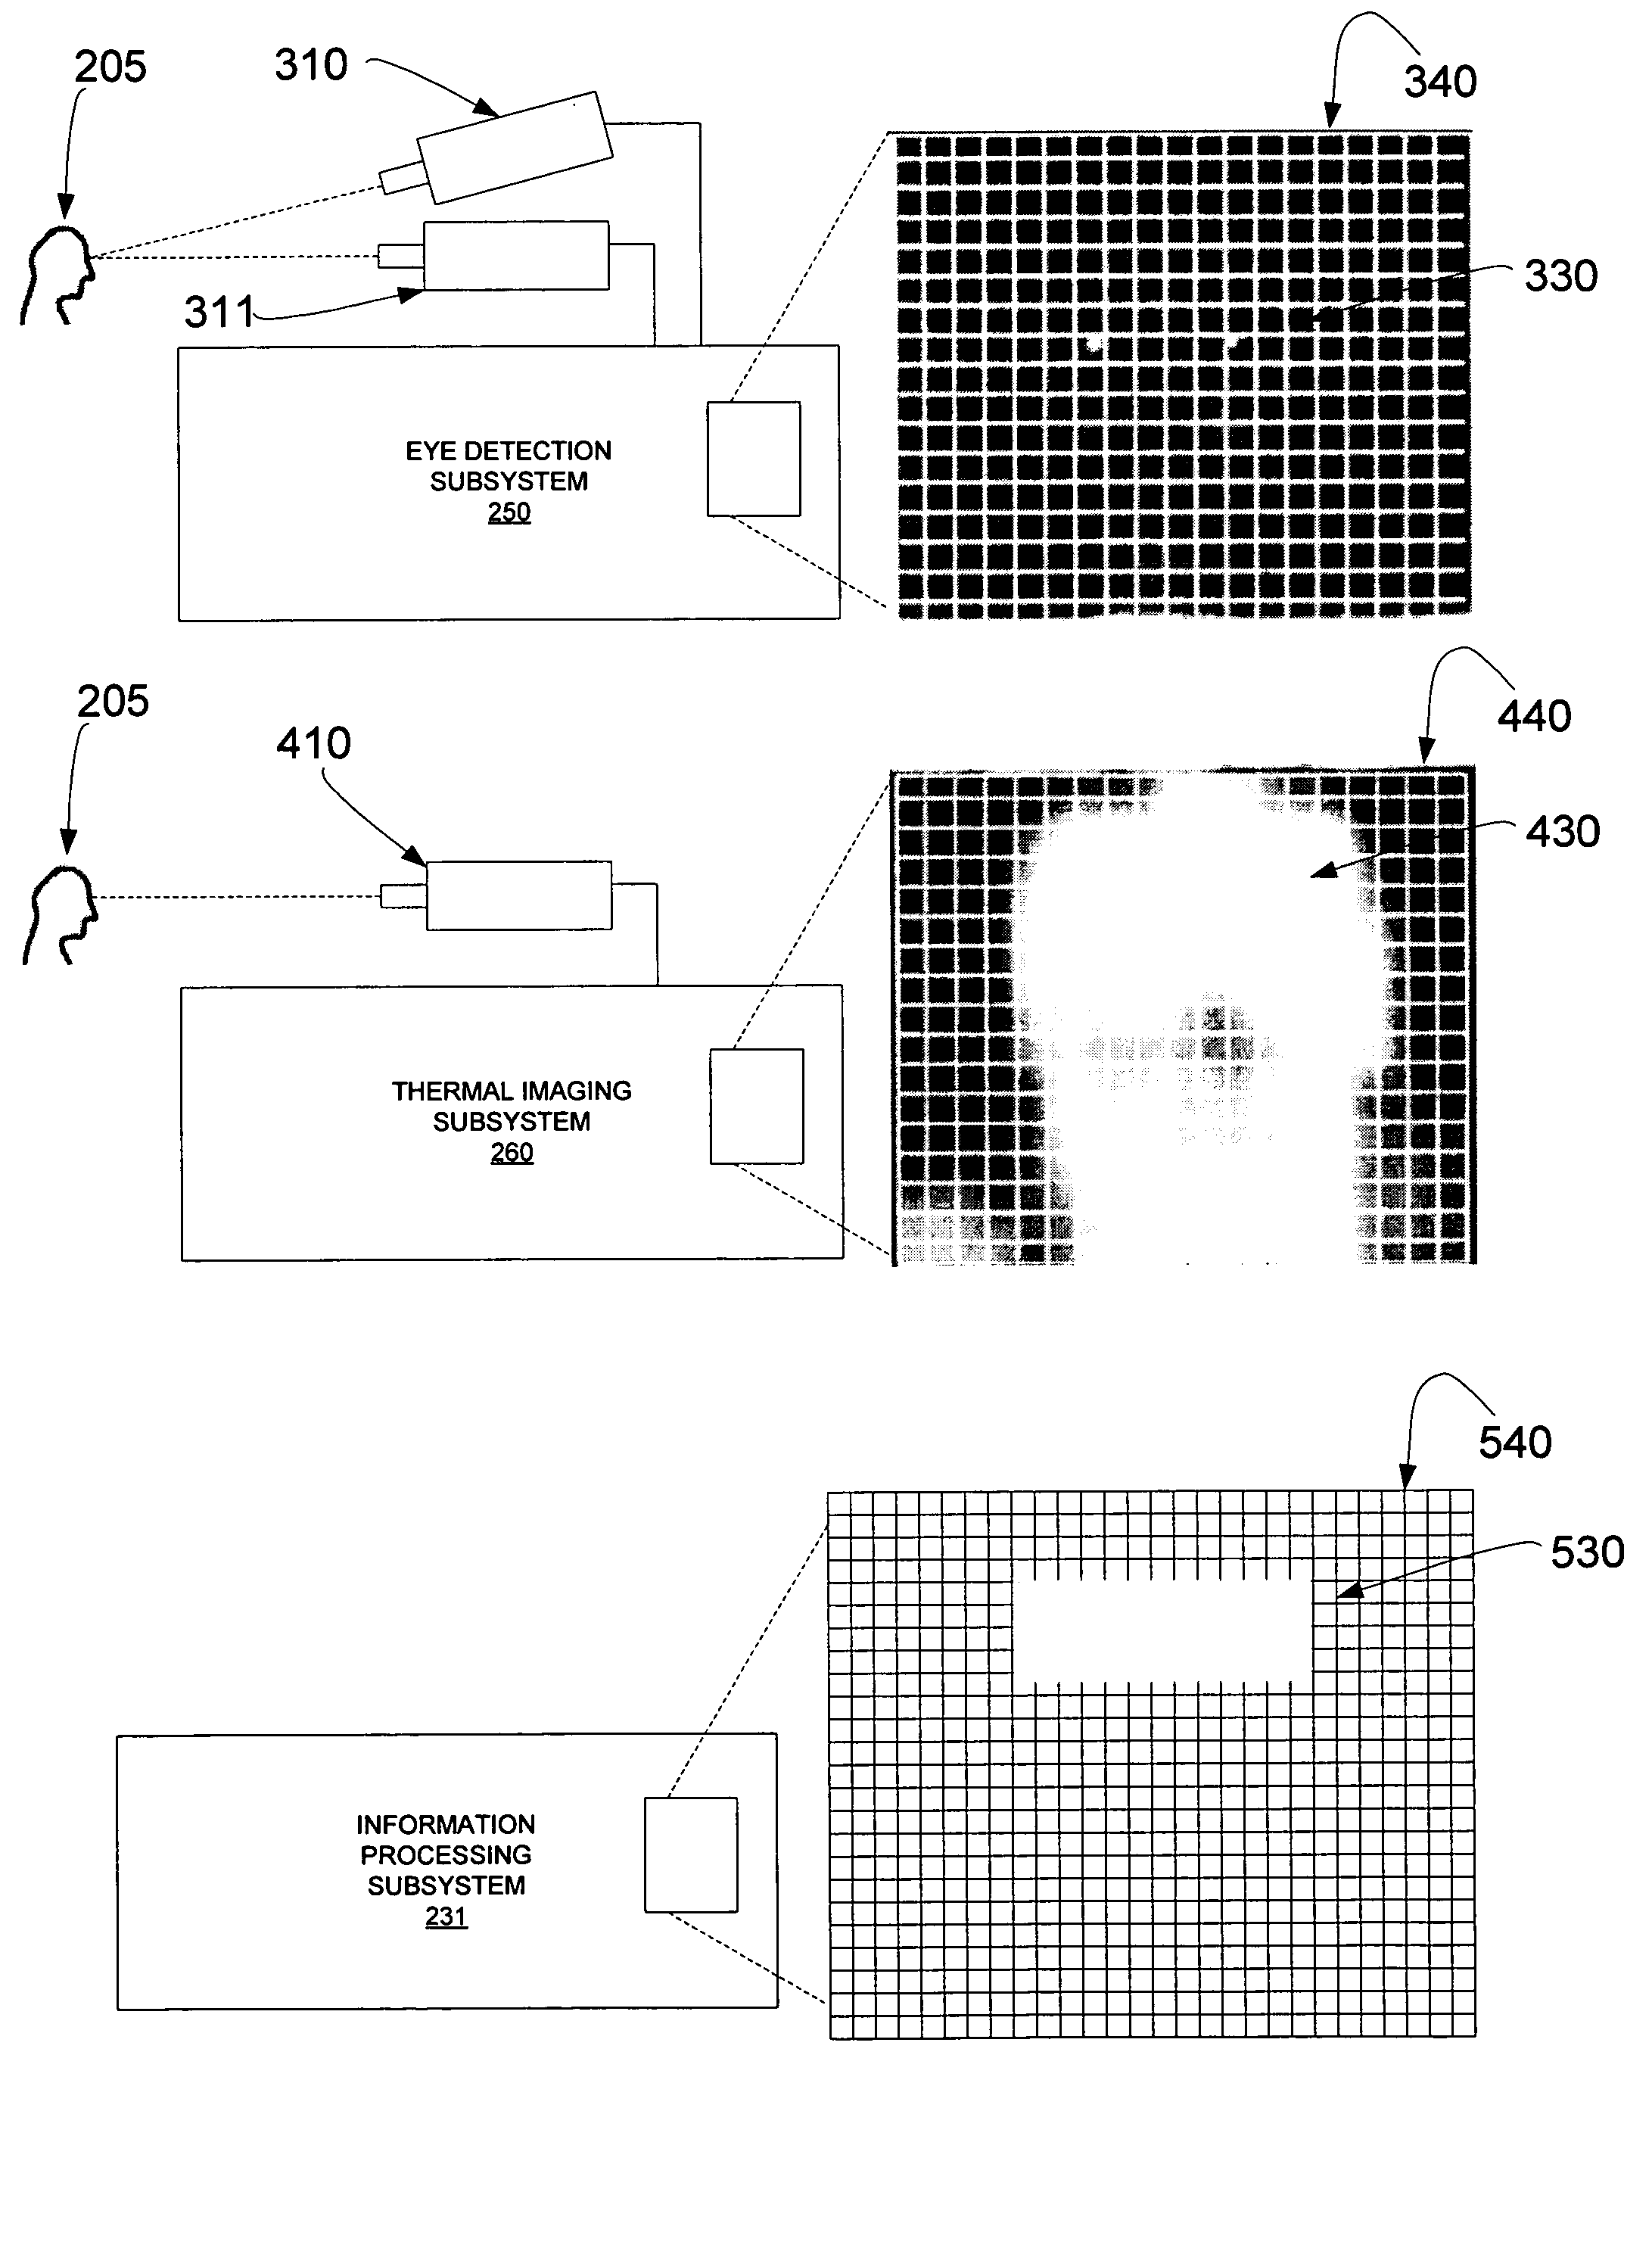 System and method for detecting thermal anomalies